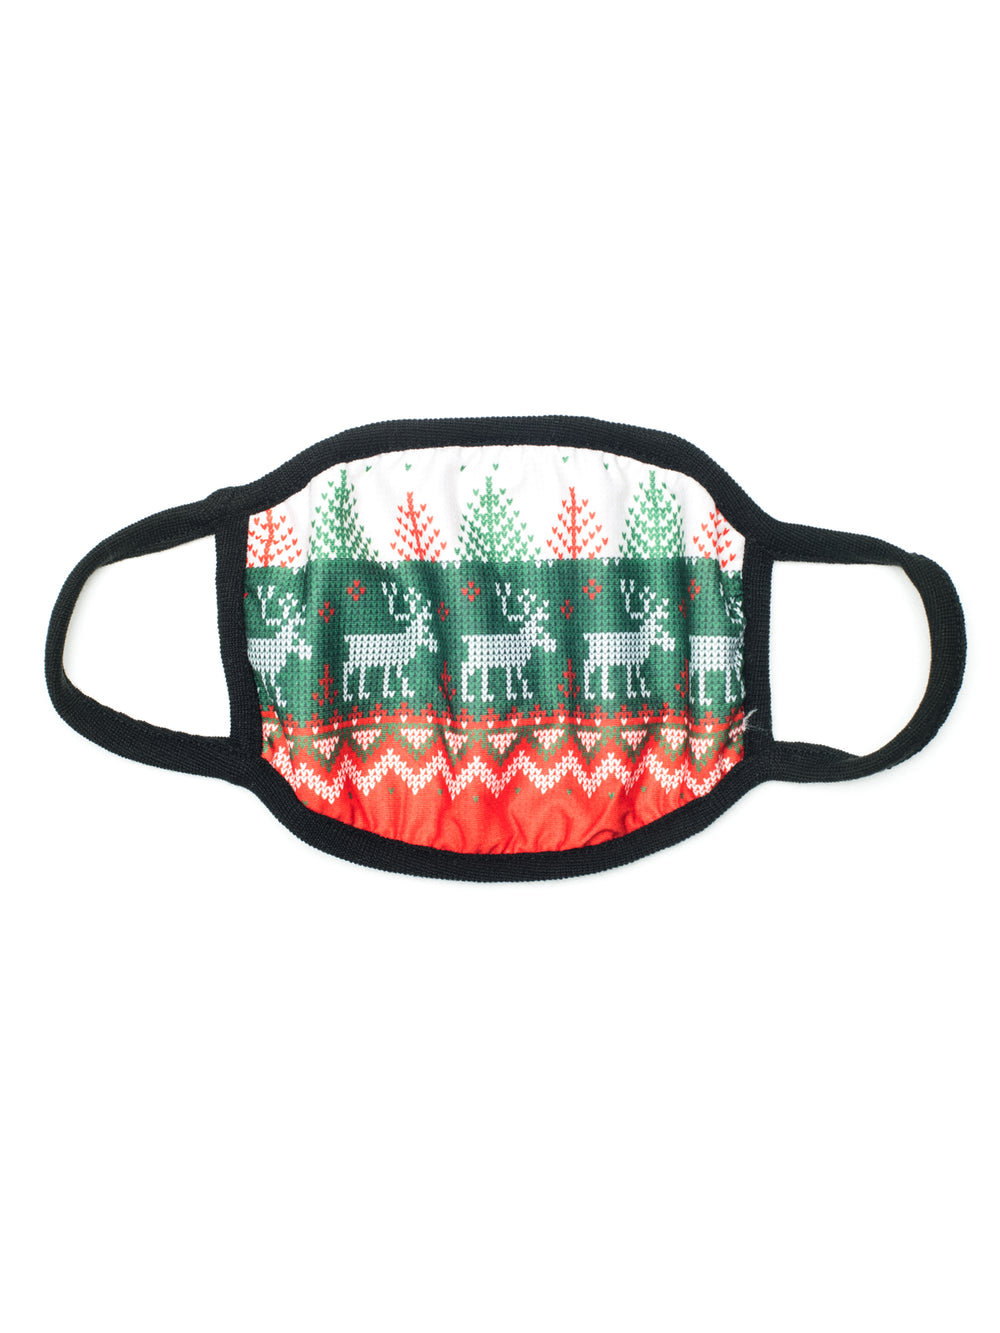 MOOSE KNIT MASK - CLEARANCE